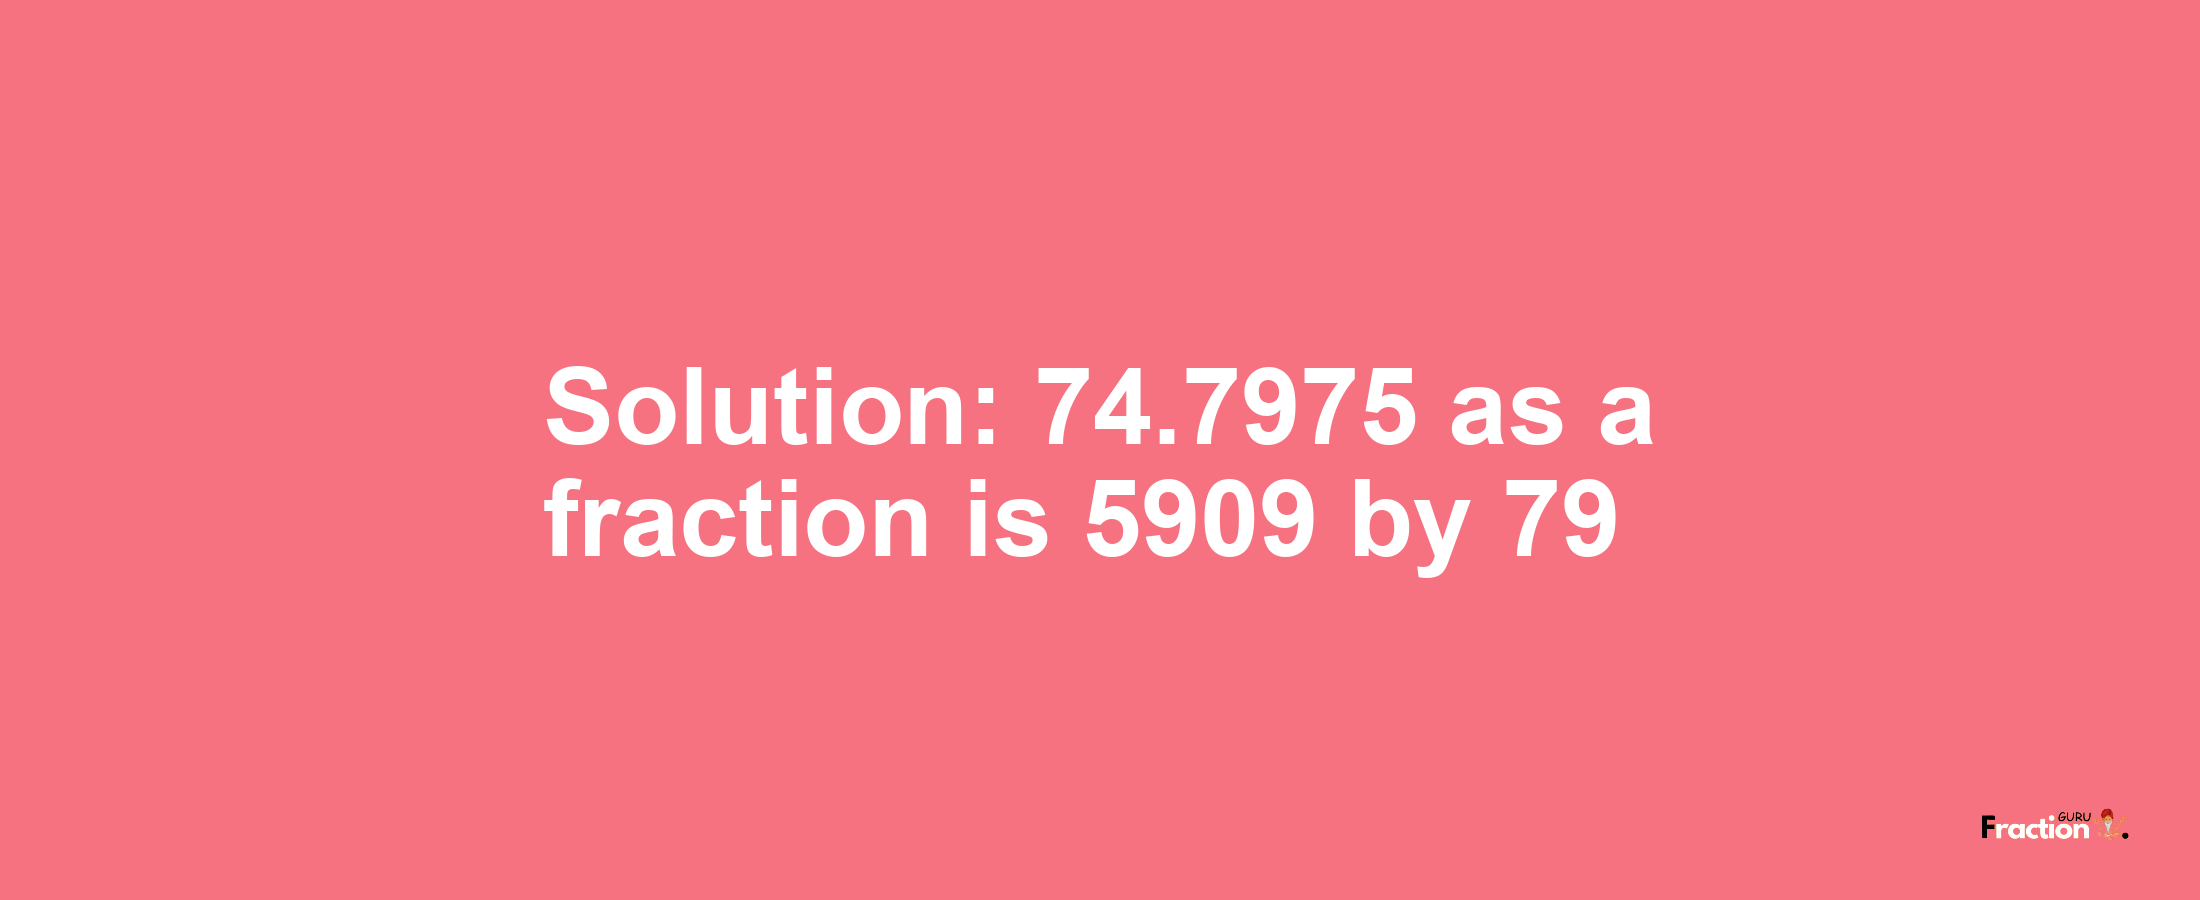 Solution:74.7975 as a fraction is 5909/79